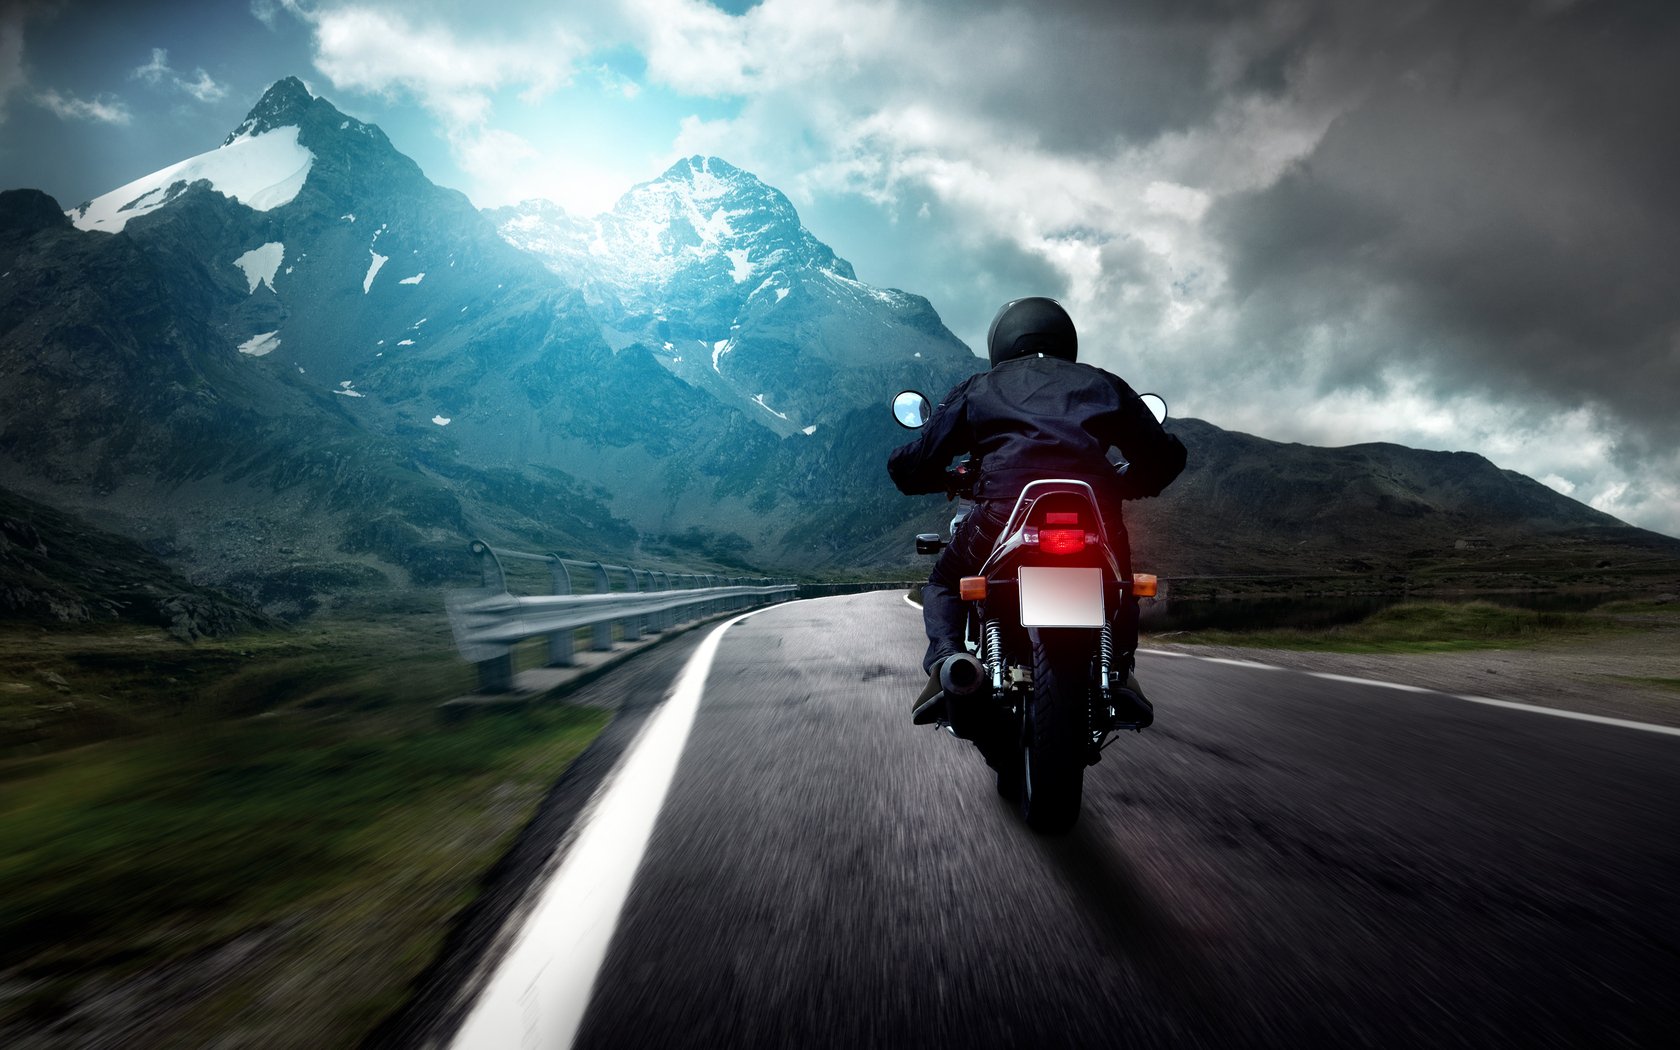 The 7 Things Only Motorcycle Riders Understand.